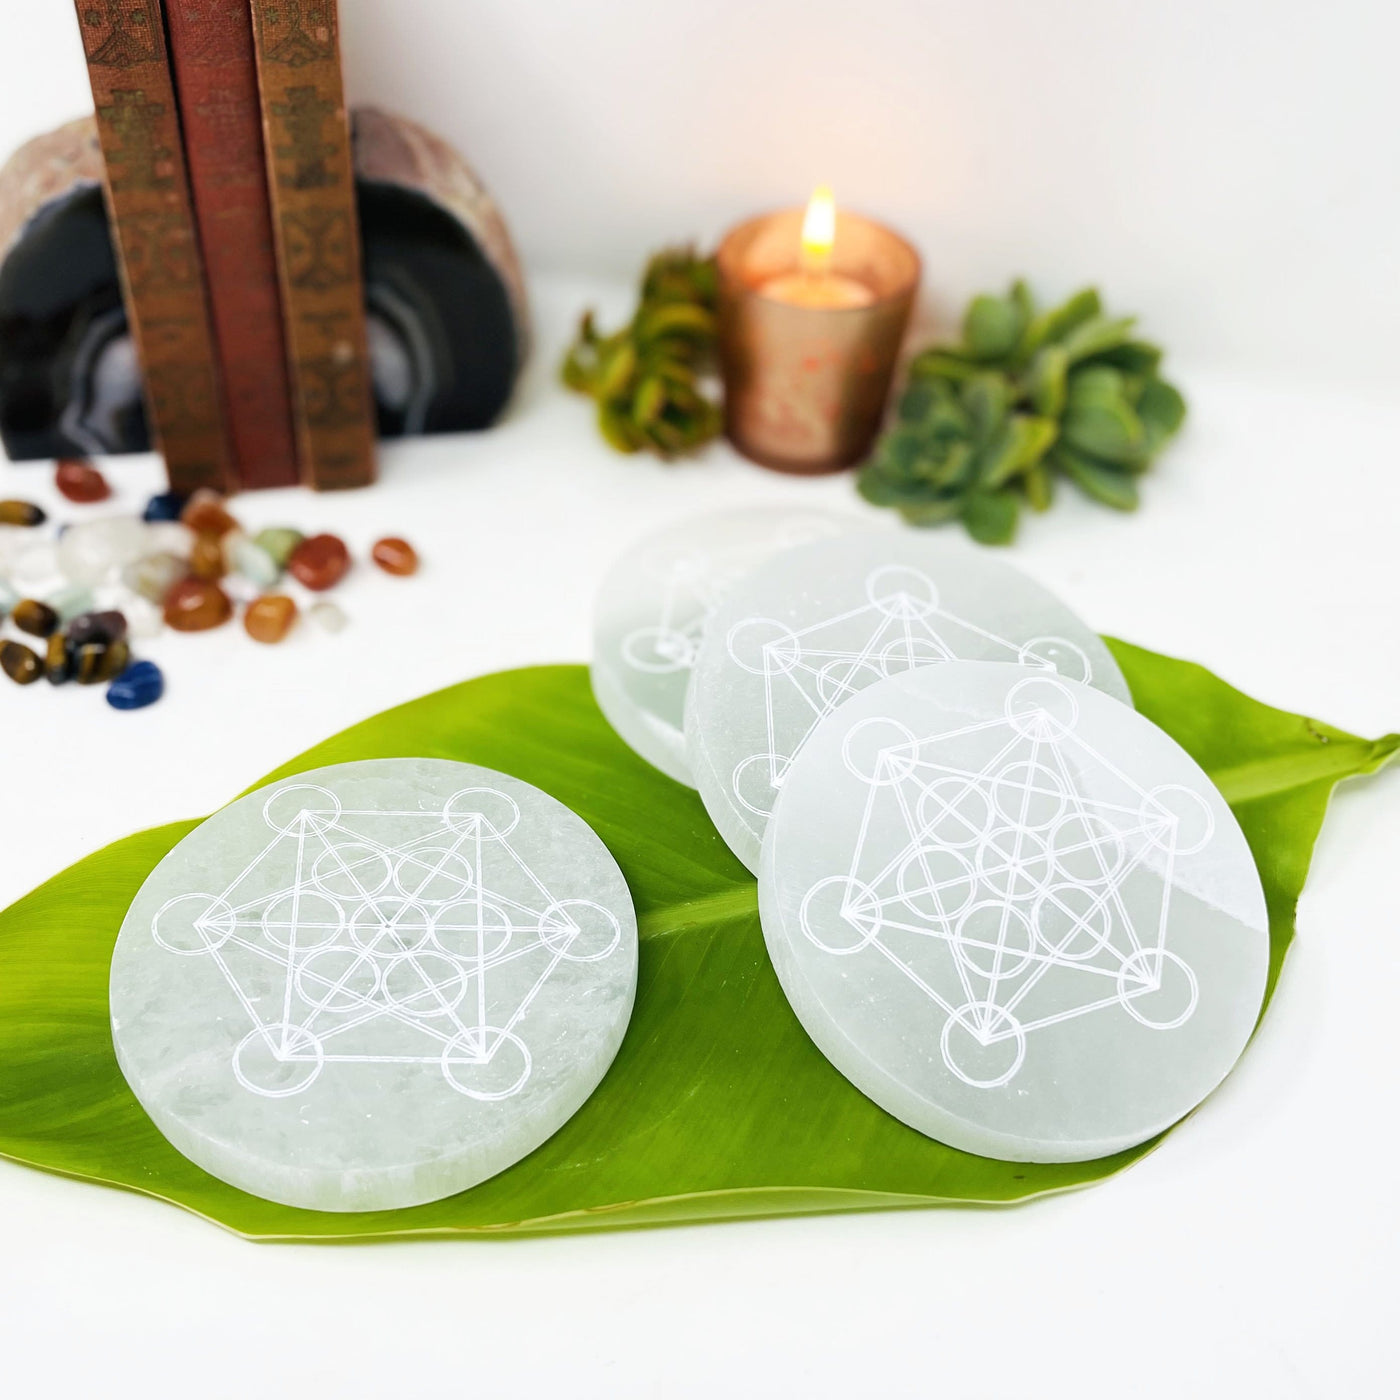 selenite rounds with metatron engraving on display